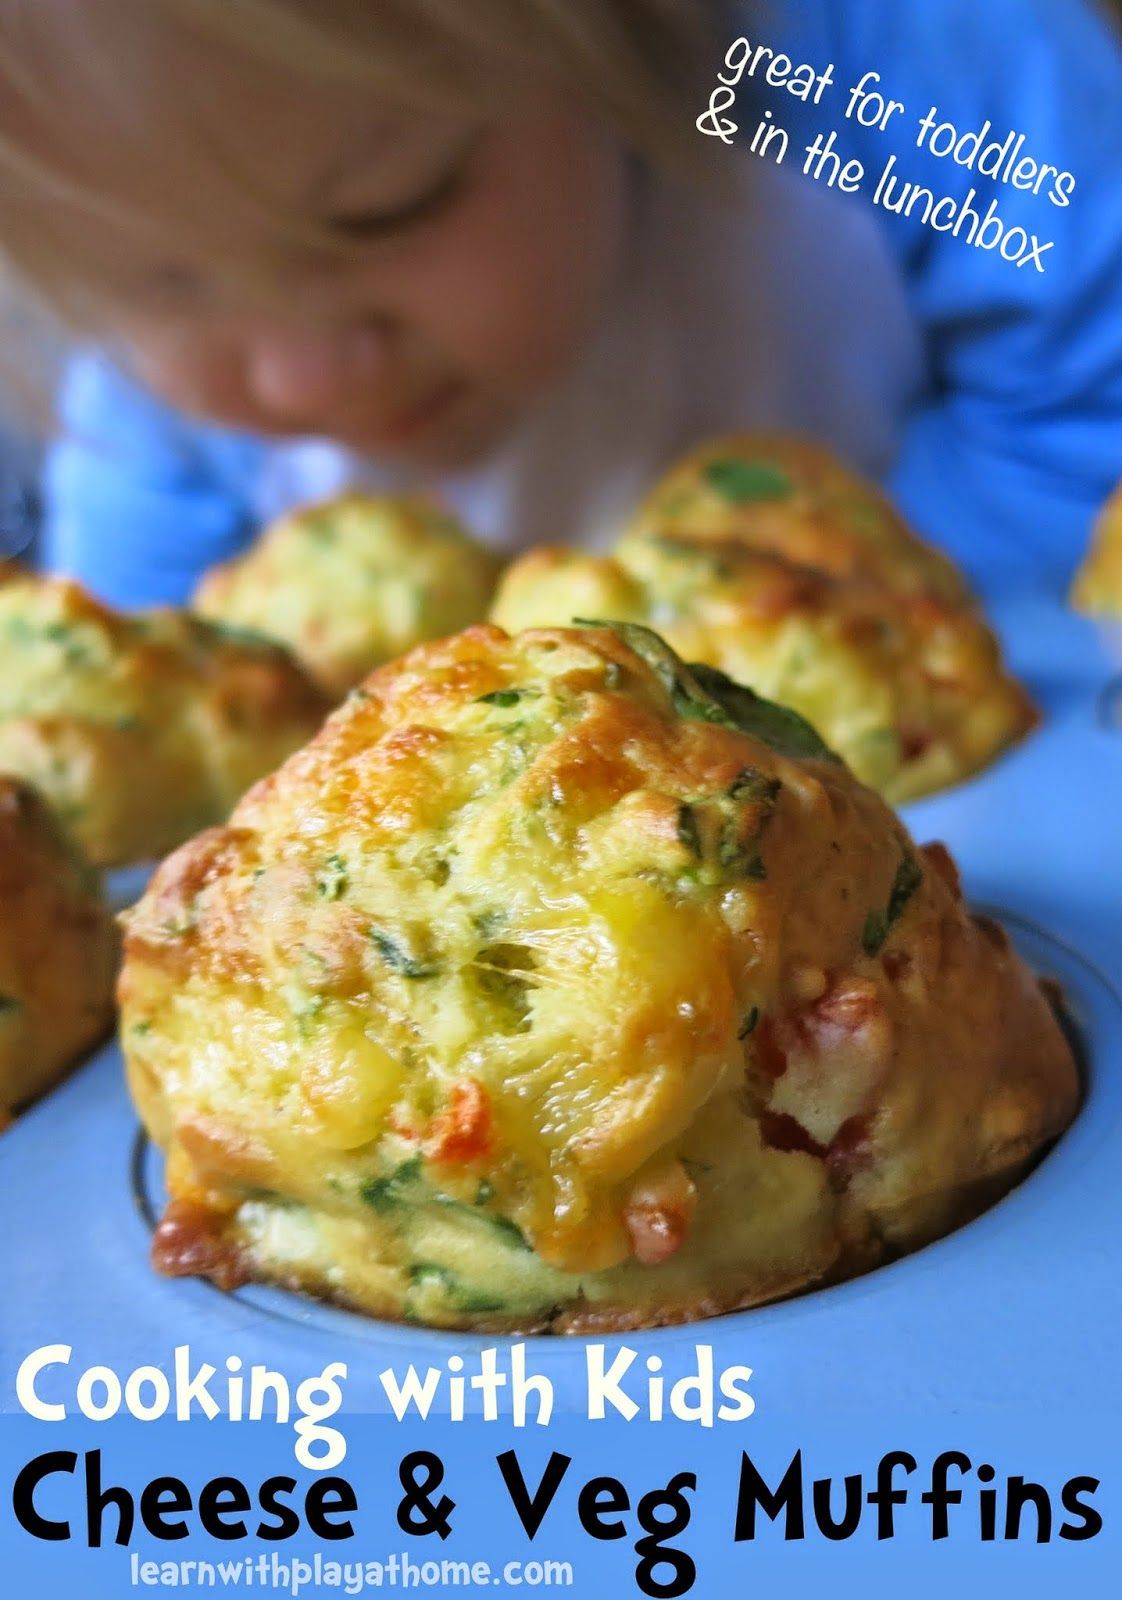 Children learn so much from cooking. If youre looking for a simple, healthy recipe to cook with kids, these cheesy veg muffins